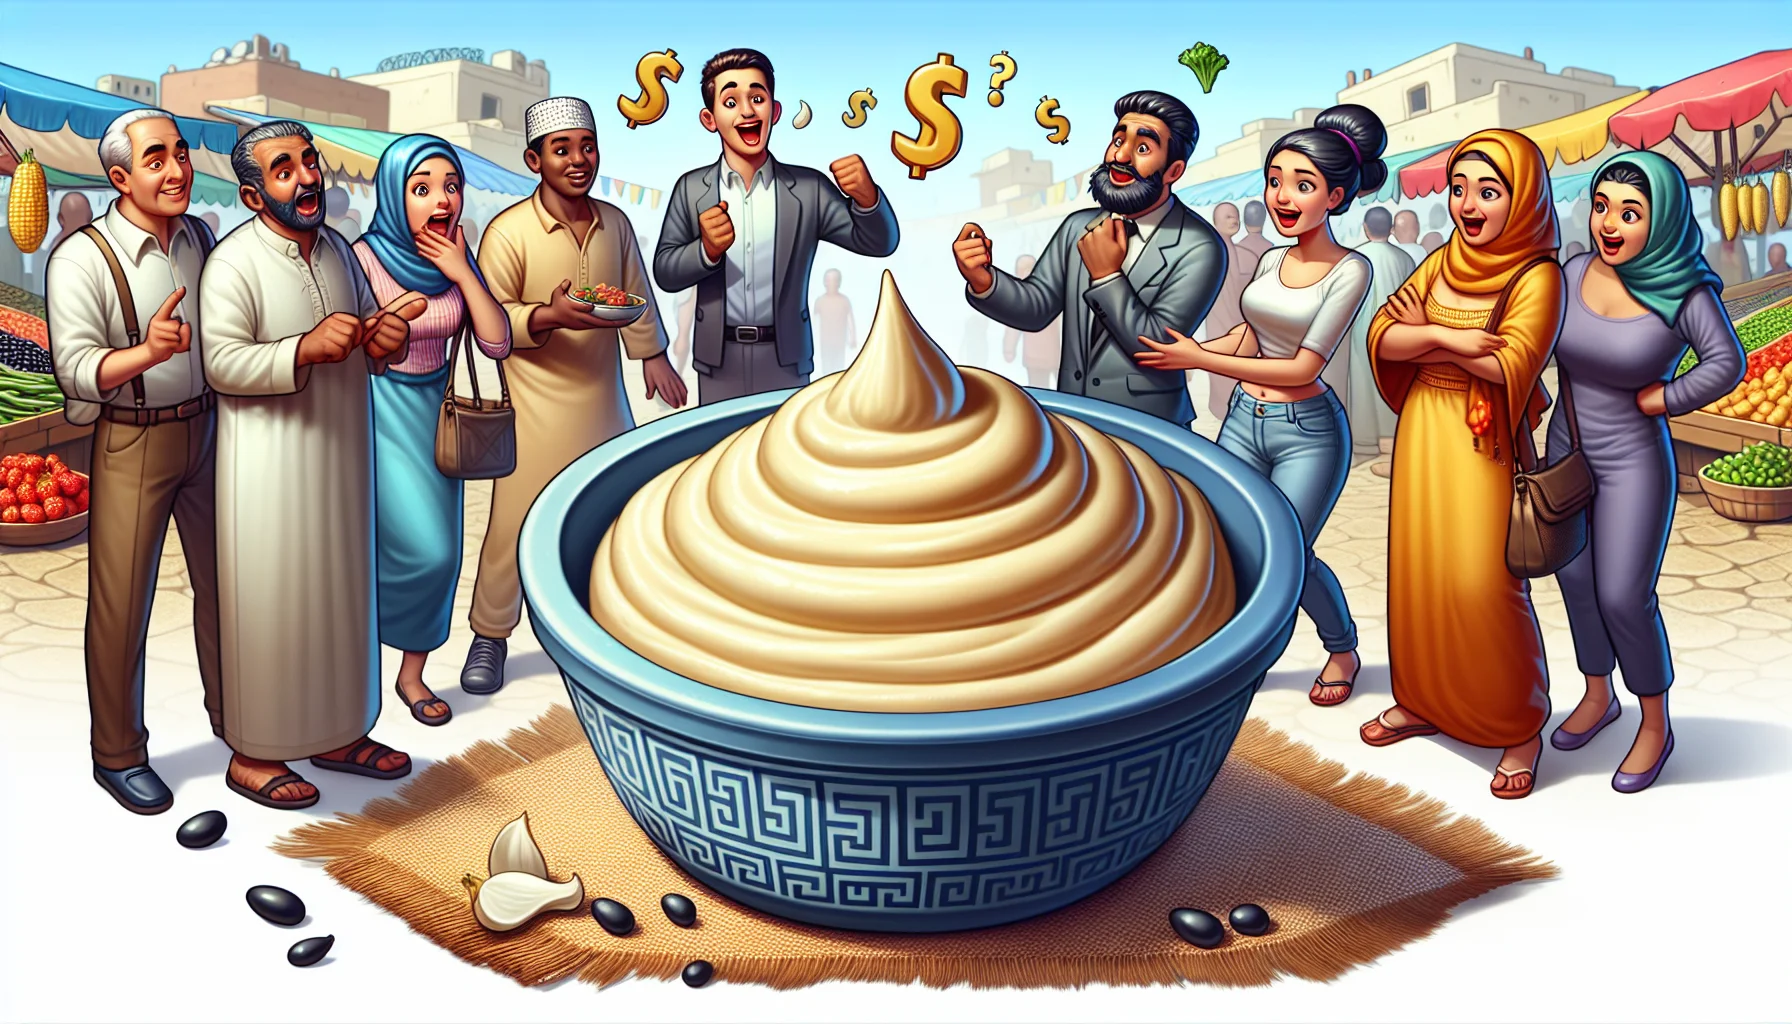 Create a fun and engaging image that depicts a scene at a bustling outdoor market. In the center of the image, place a large dollop of creamy Greek hummus, realistically illustrated with intricate detail to highlight its rich texture and tempting appearance. Surrounding the hummus, include illustrated cost-conscious individuals, ranging from Middle-Eastern male vendor to a South Asian female customer, all expressing surprise and delight at the low price of the hummus. Use bright colors and light-hearted imagery to depict the benefits of eating healthy on a budget.